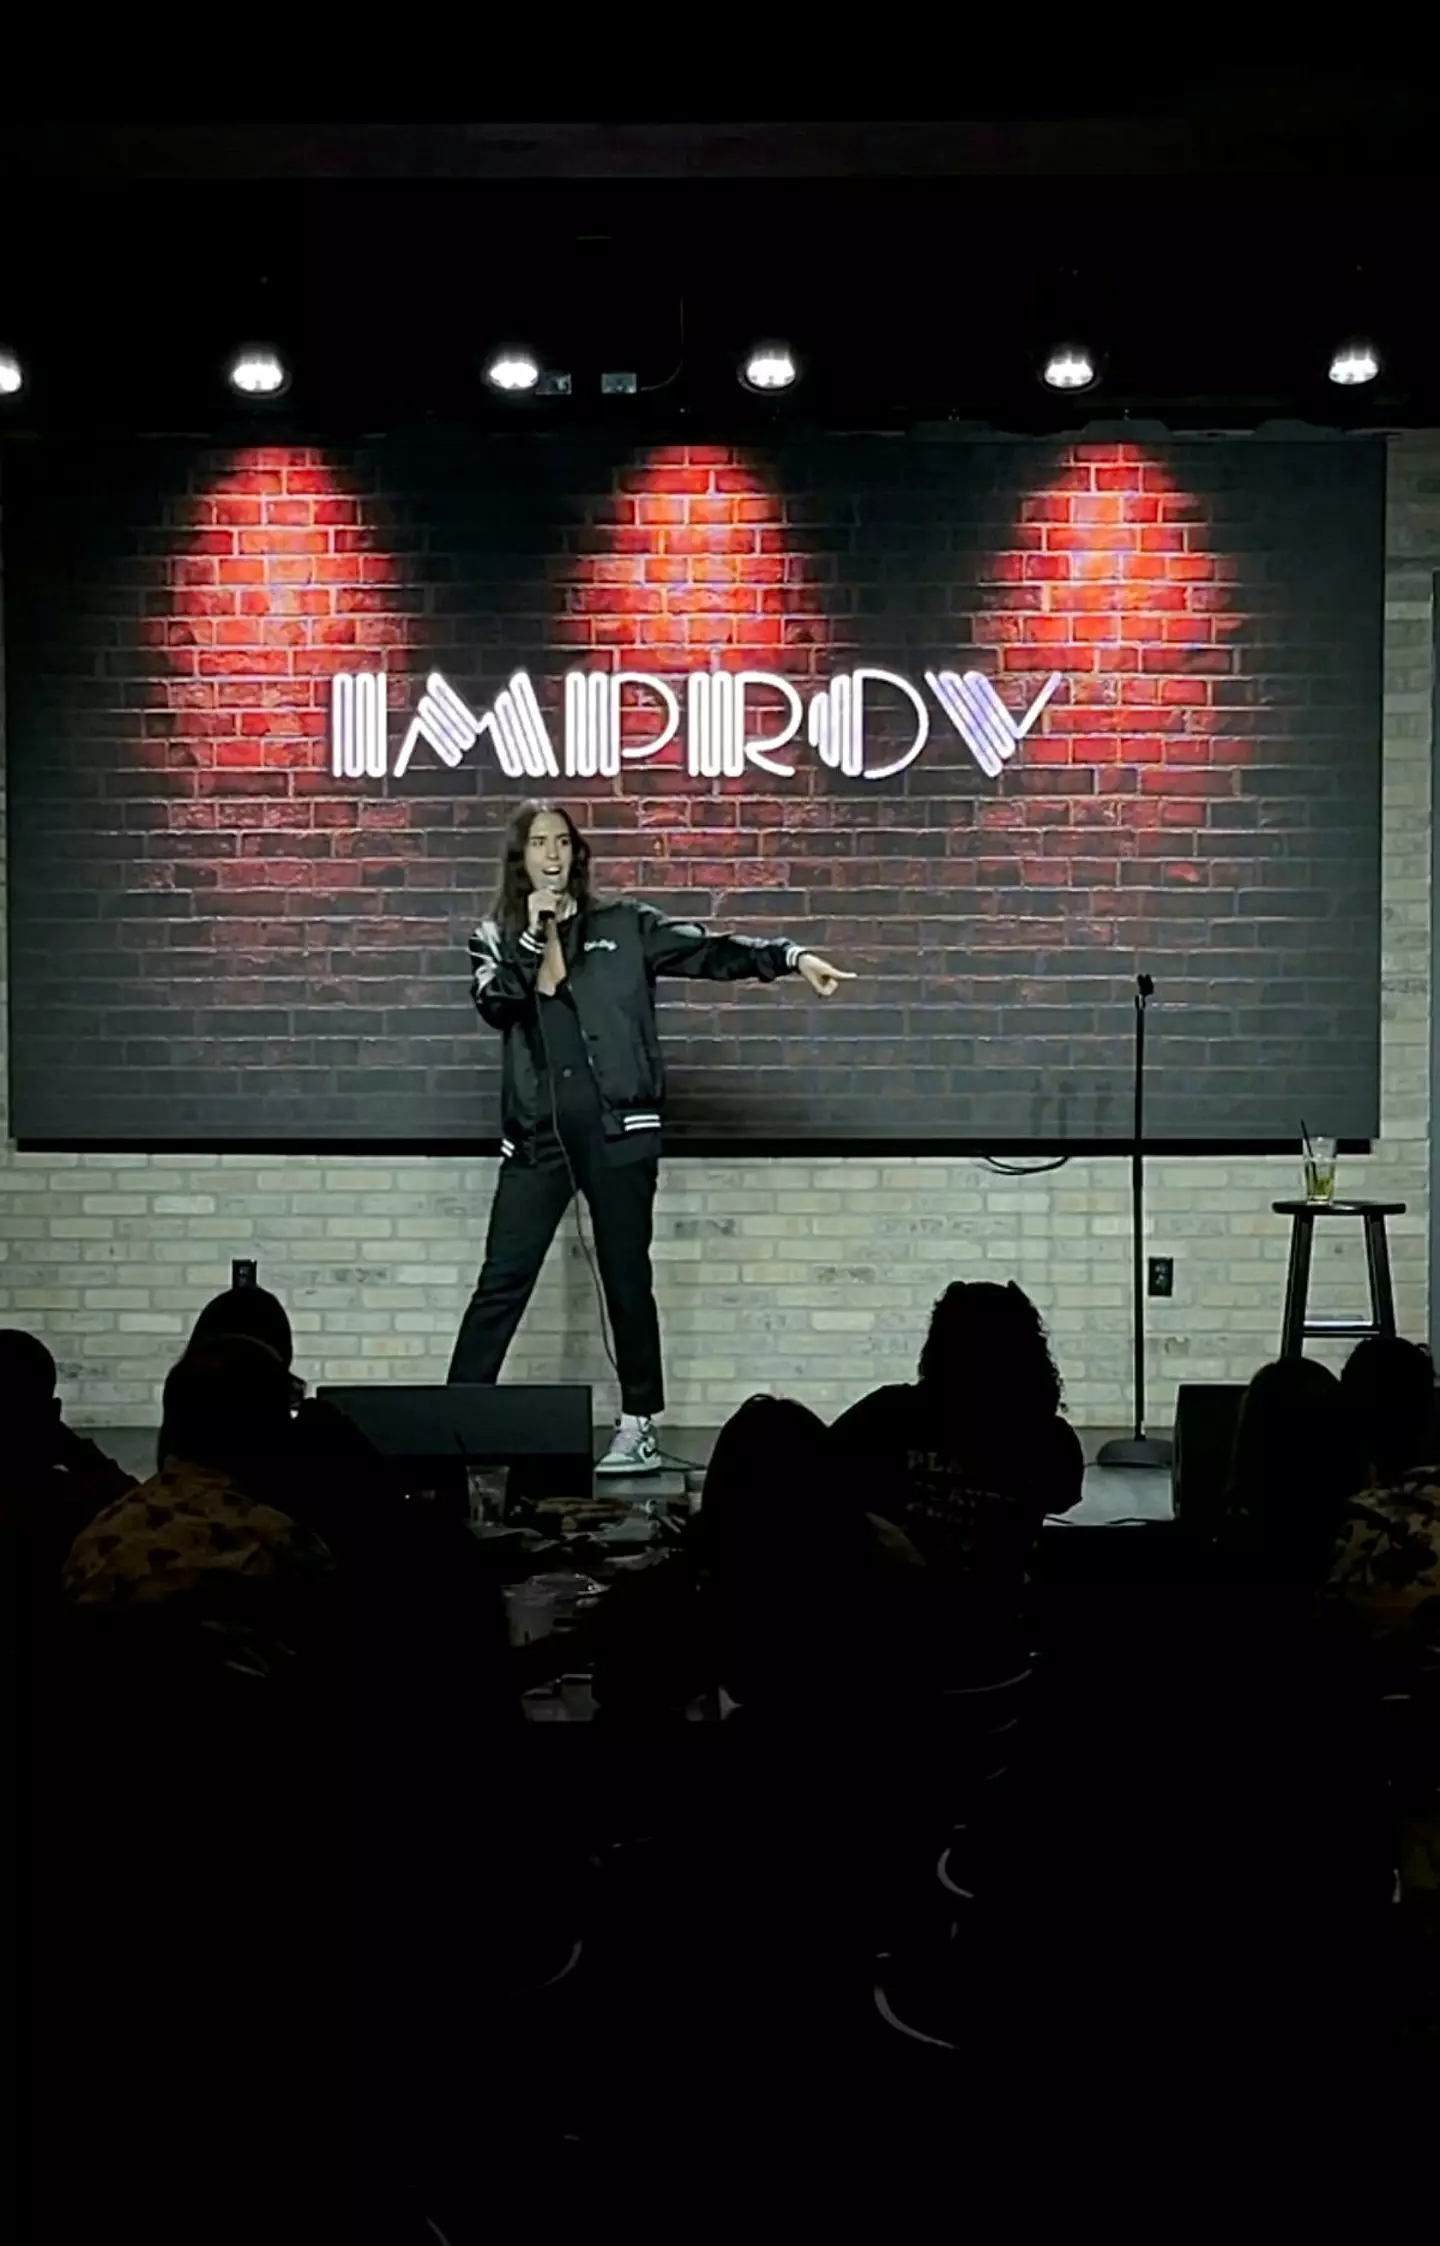 She even tried stand-up comedy.